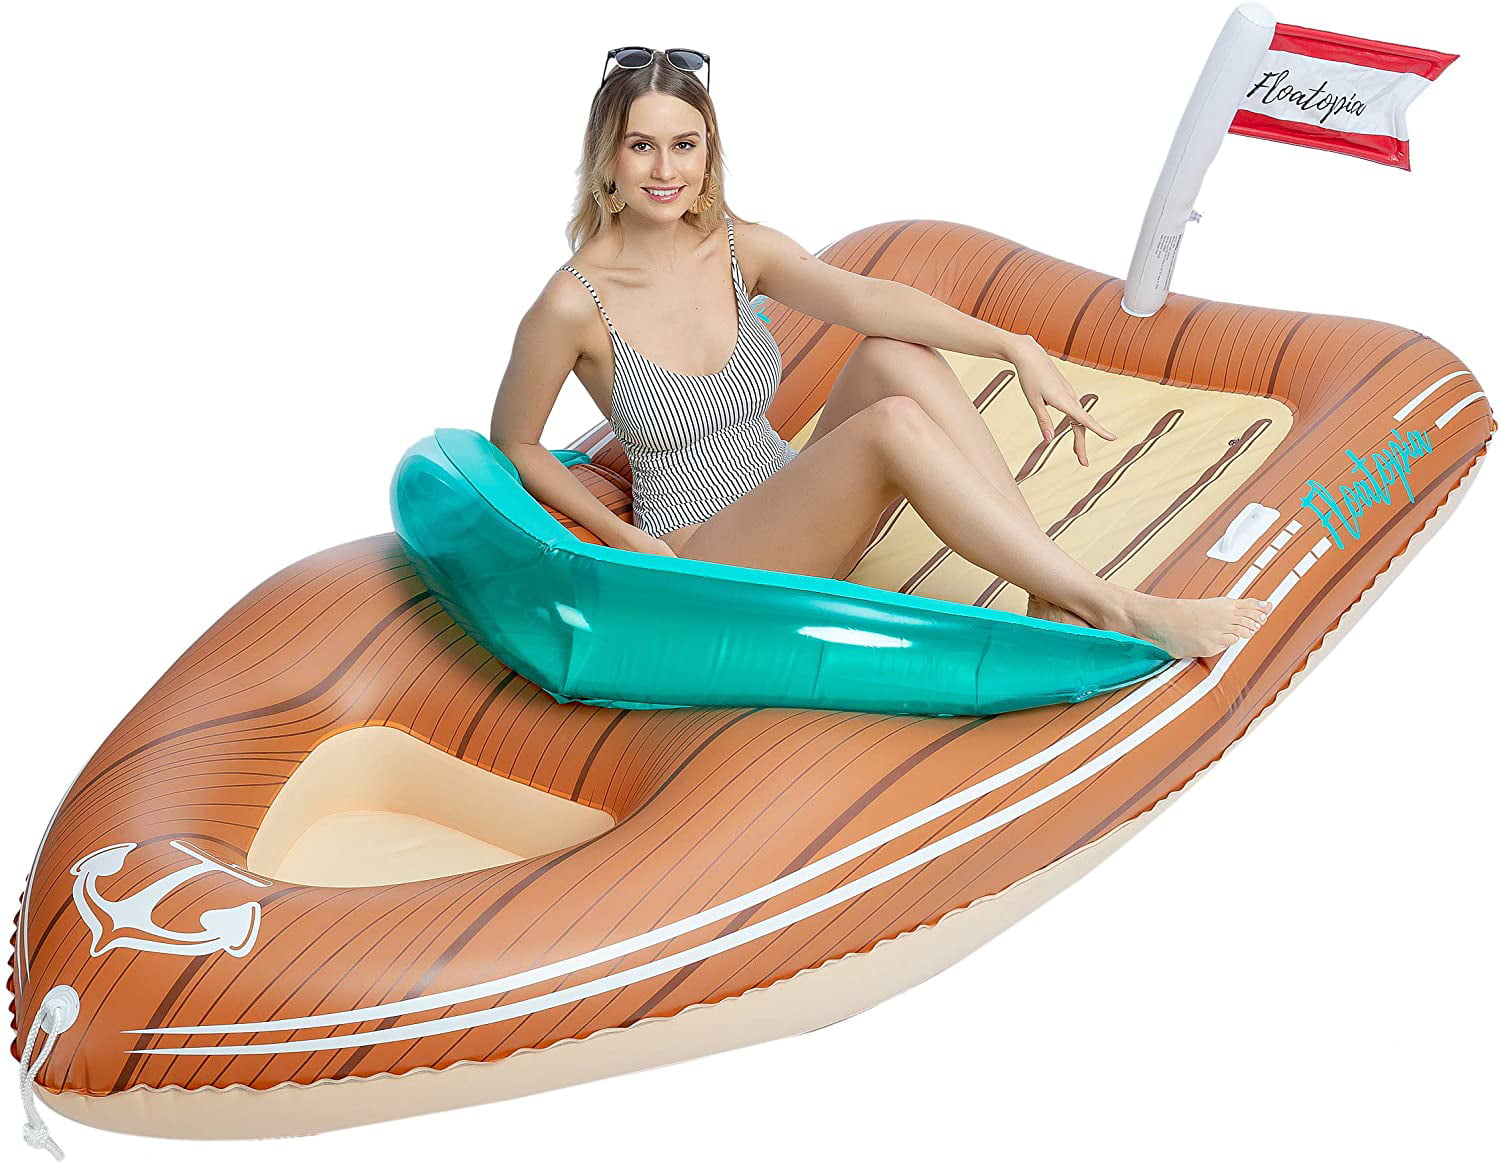 JOYIN Giant Inflatable Boat Pool Float with Reinforced Cooler Summer Pool Party Lounge Raft Decorations Toys for Kids & Adults 